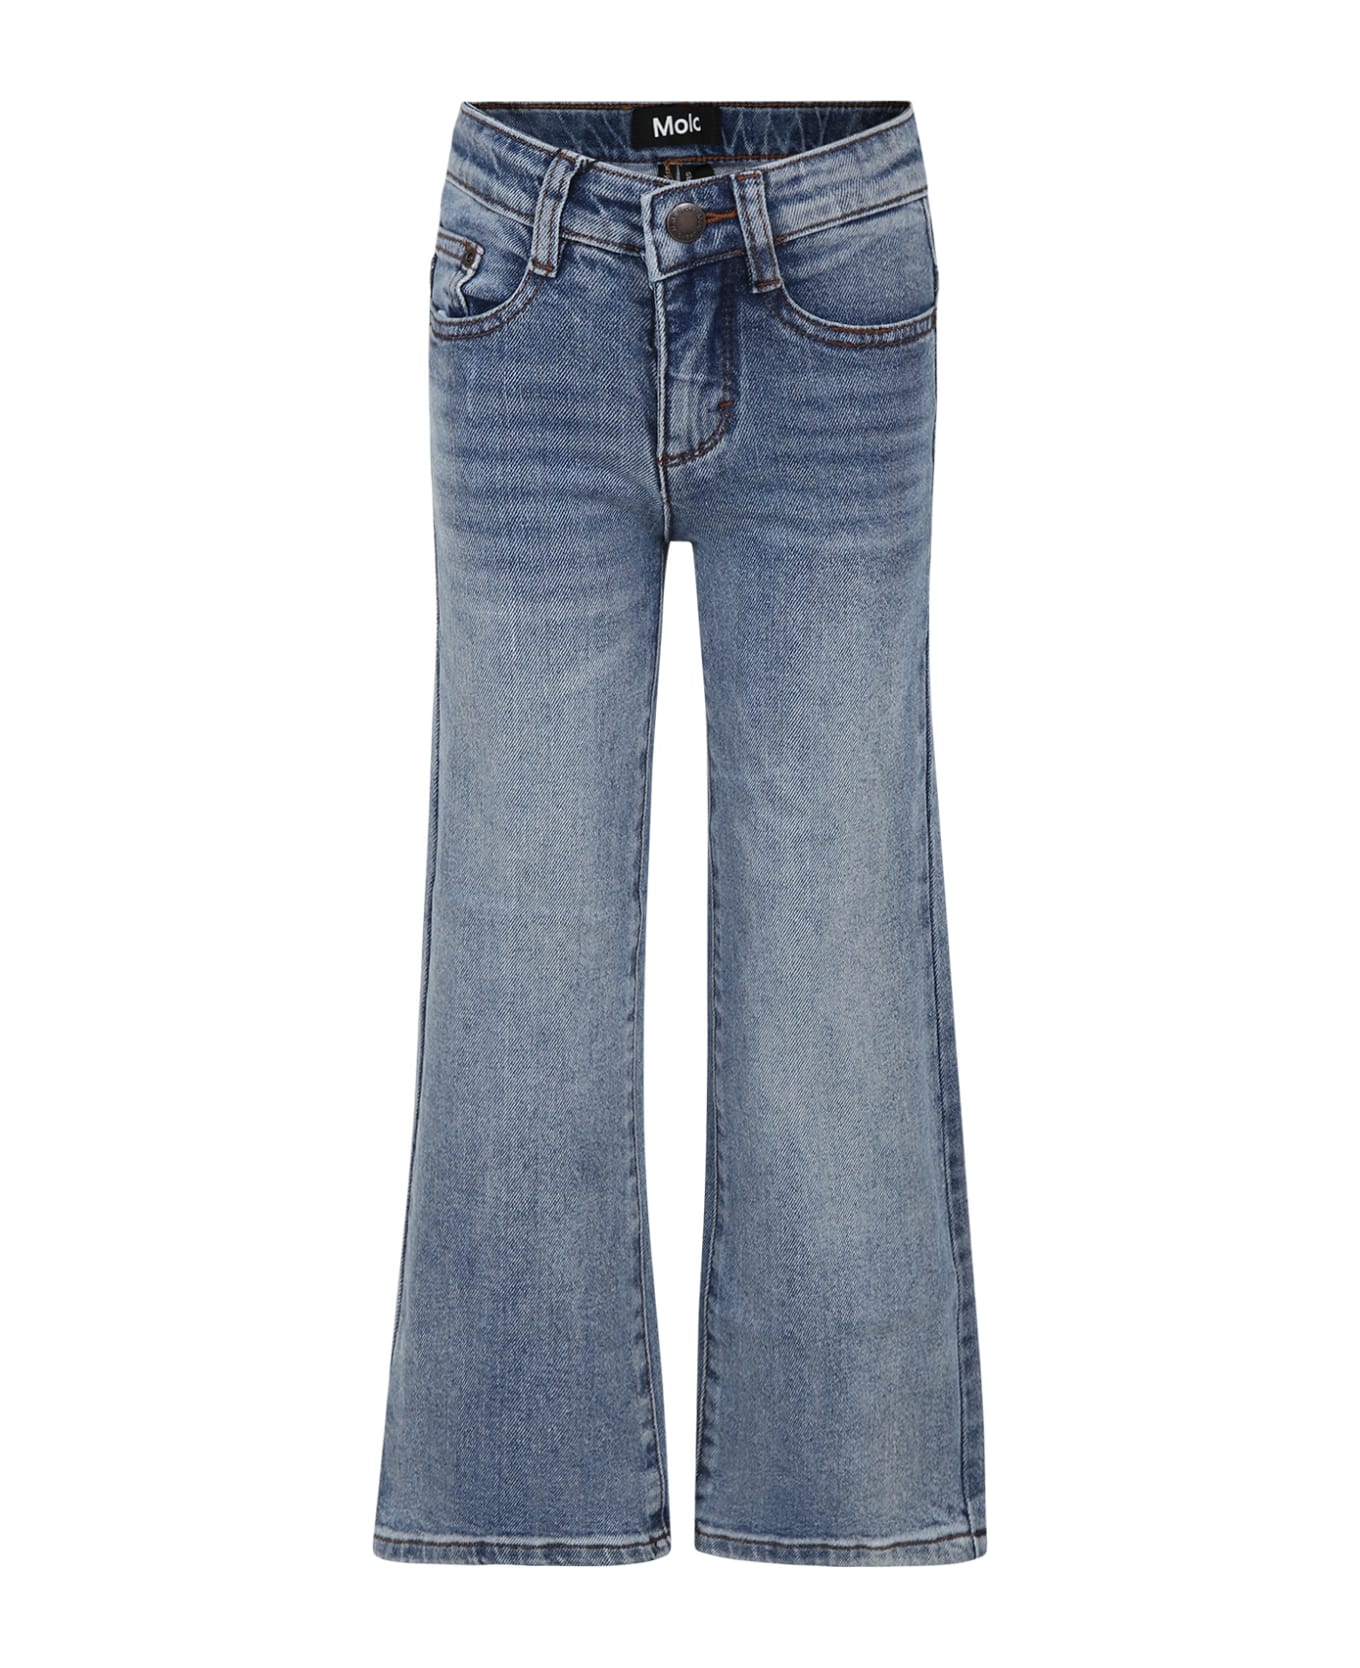 Molo Blue Jeans For Girl With Logo - Denim